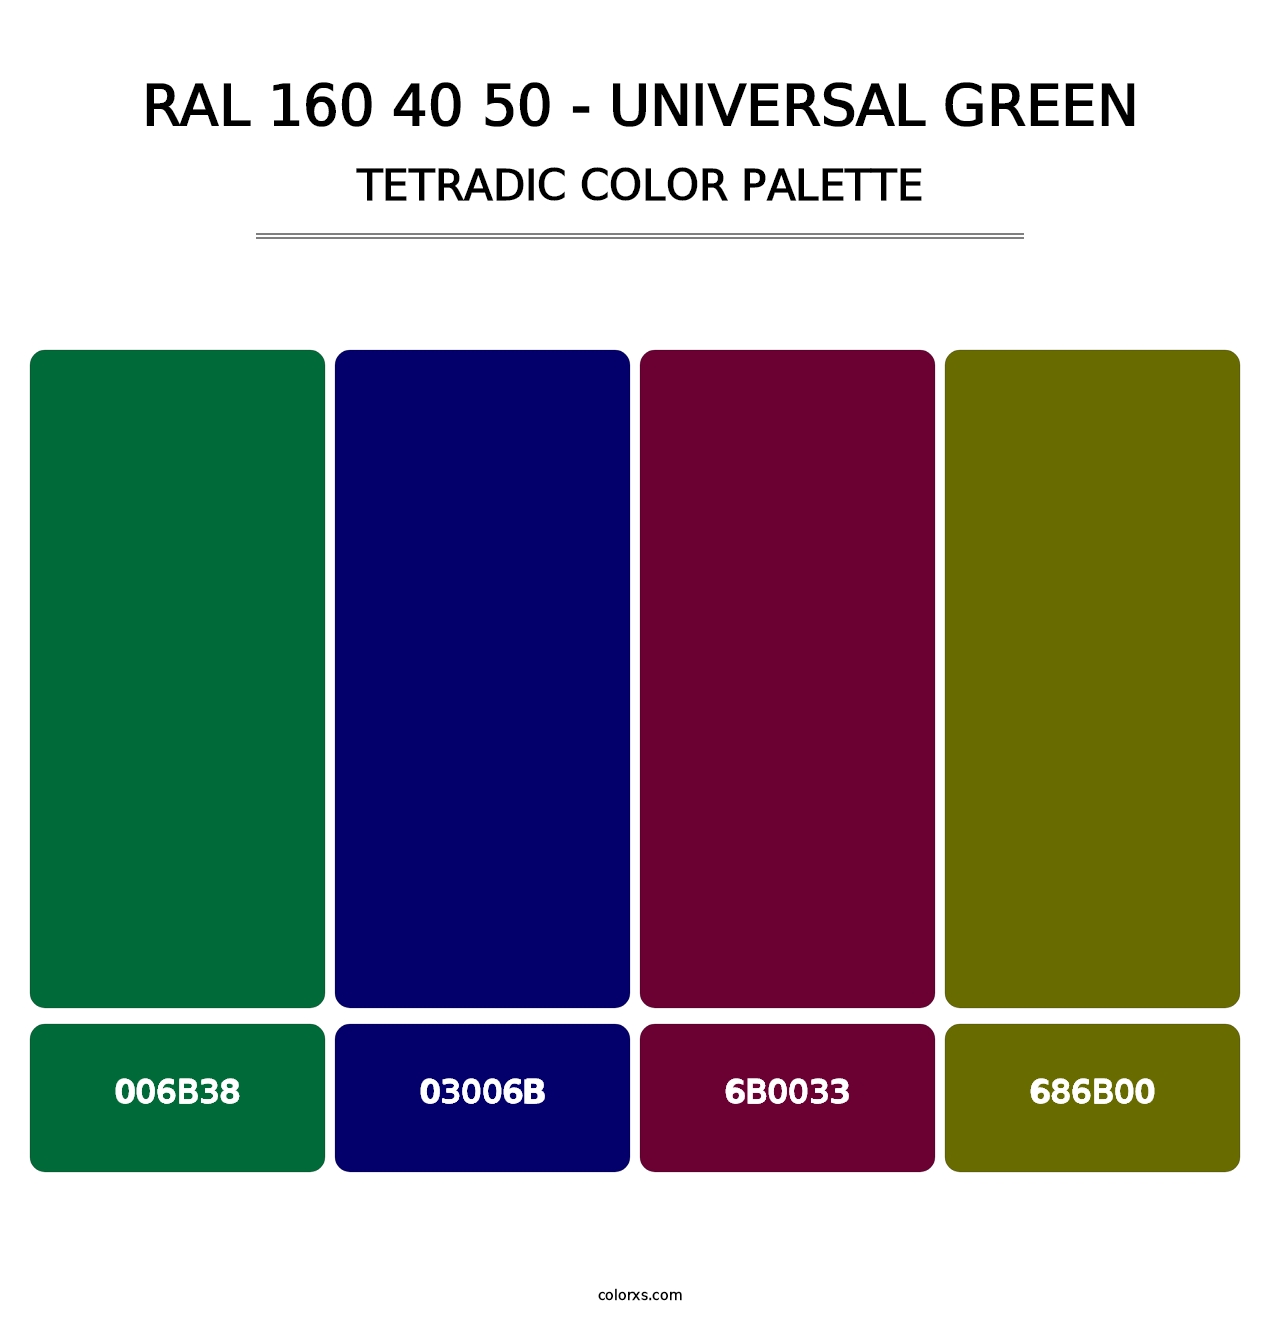 RAL 160 40 50 - Universal Green - Tetradic Color Palette